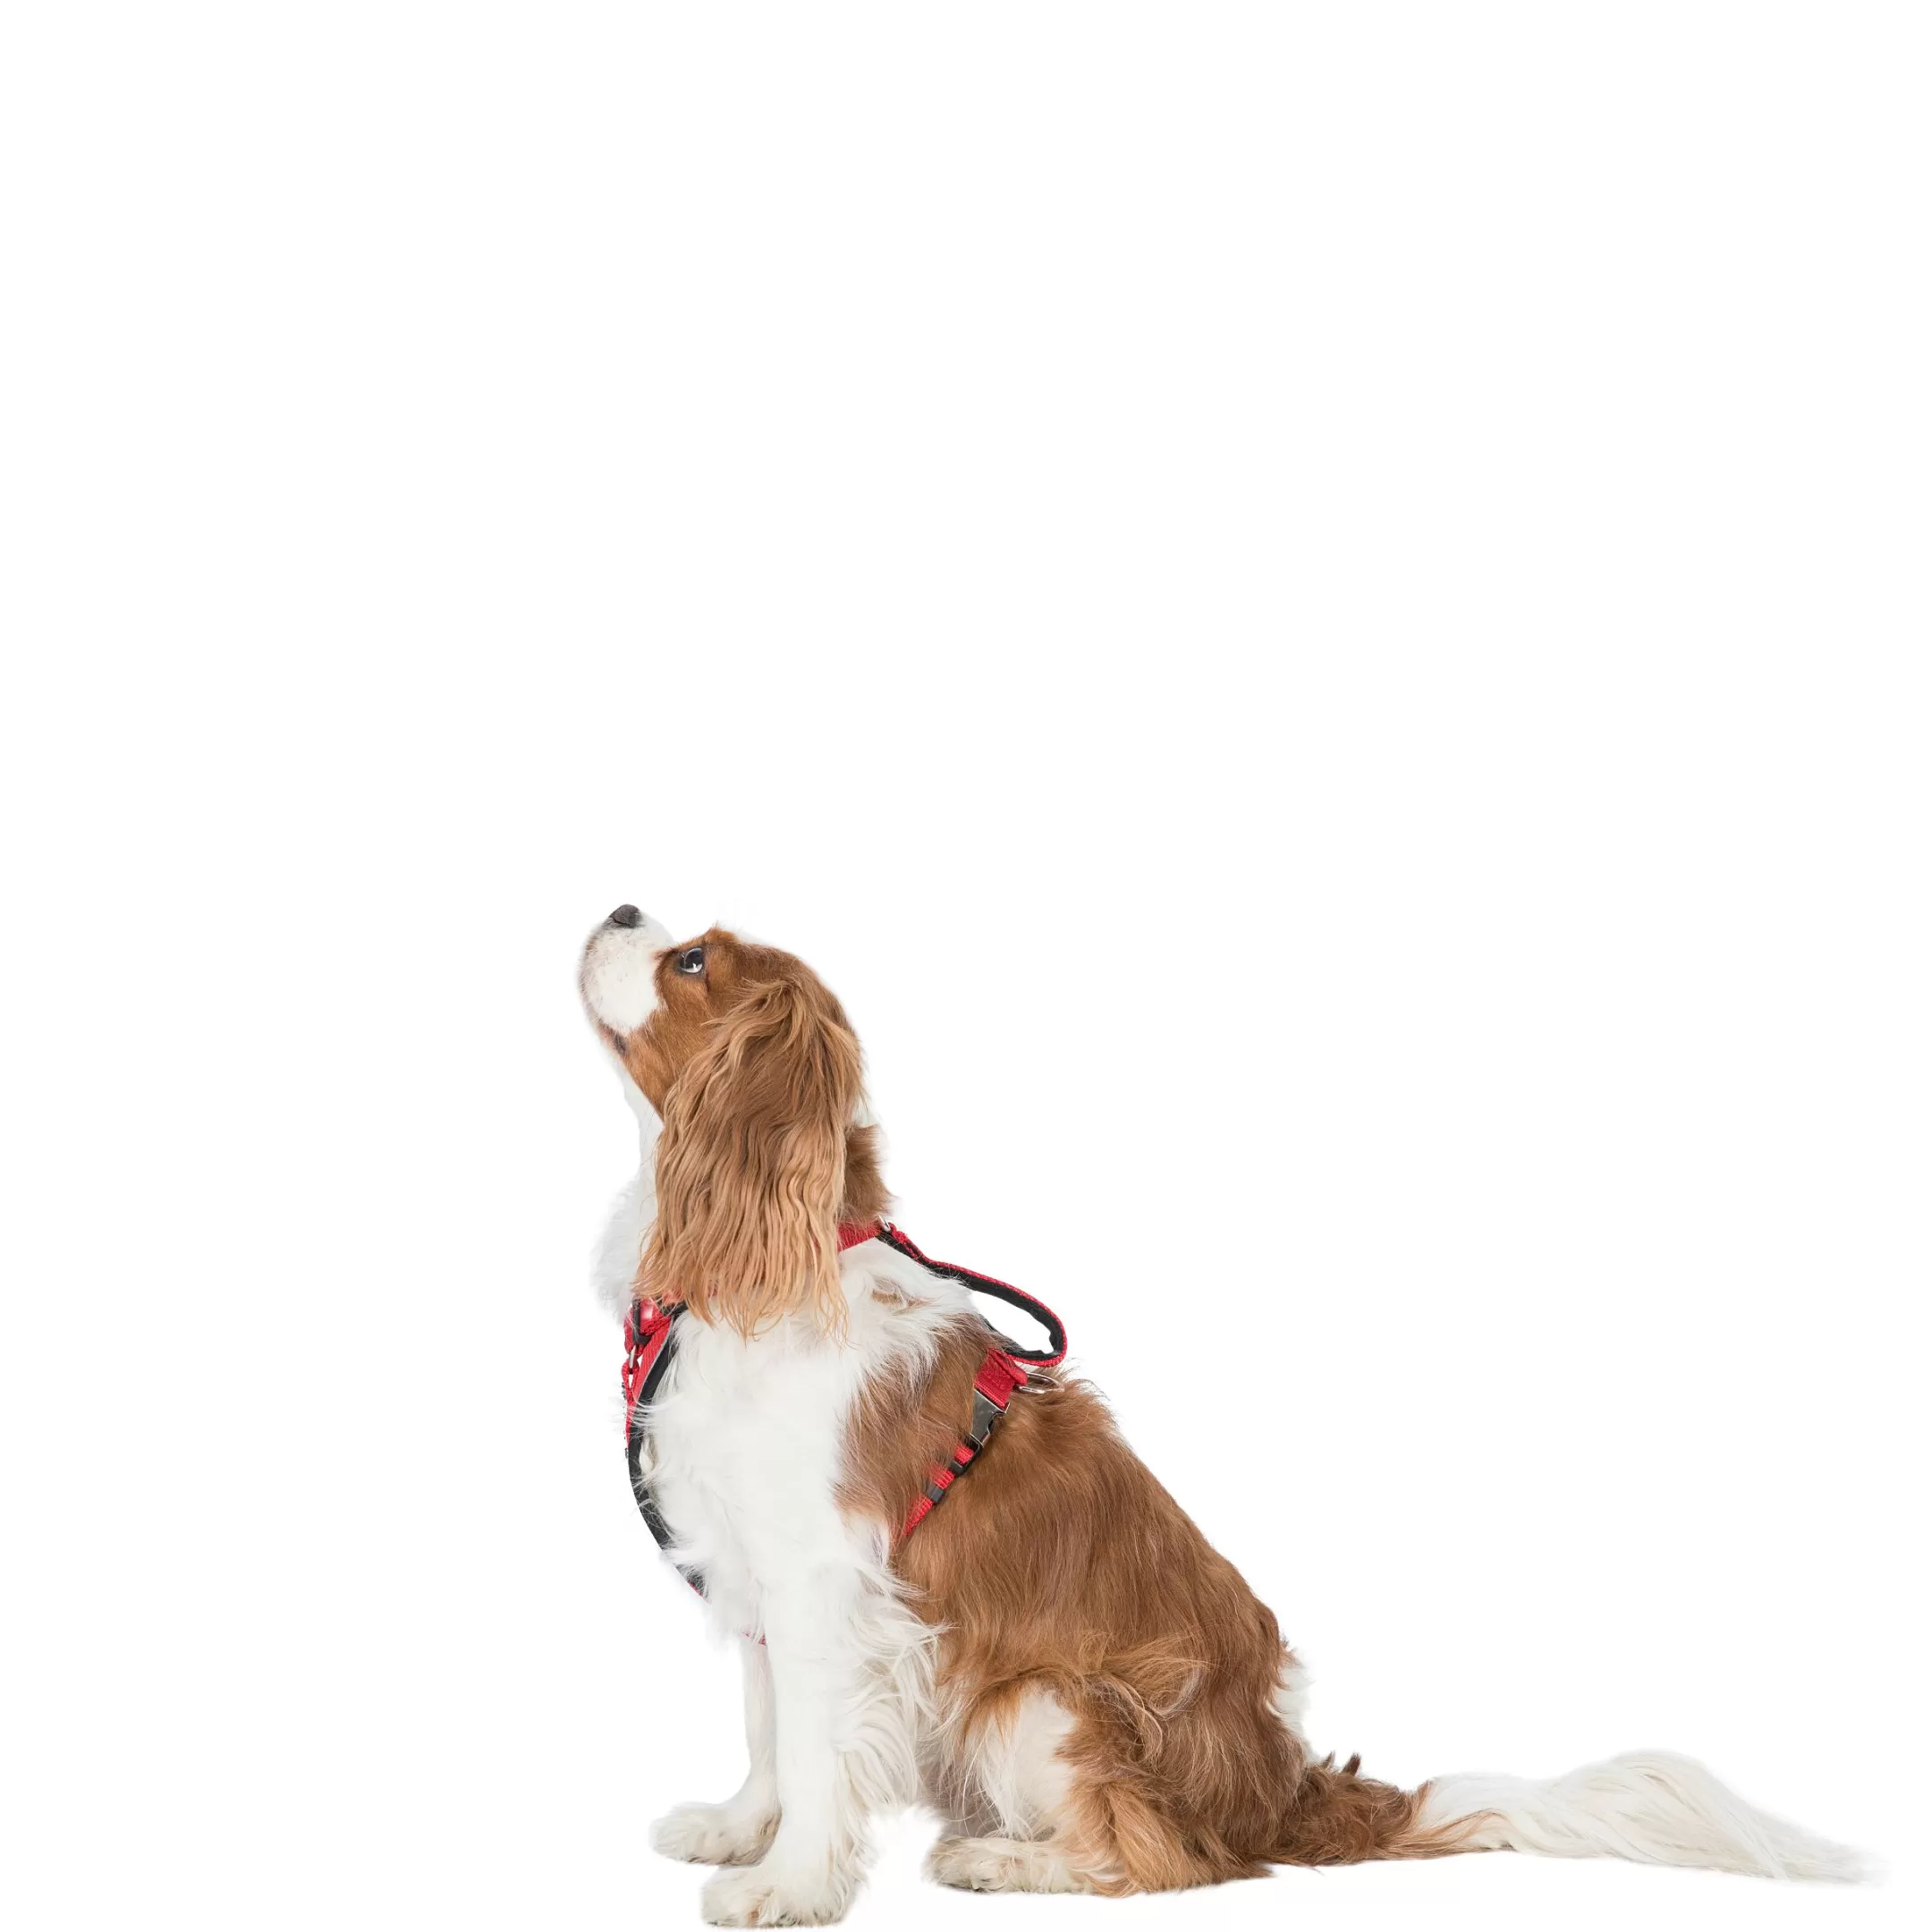 Trespaws XXS/XS Reflective Dog Harness in Postbox Red Mini Tanked | Trespass Hot